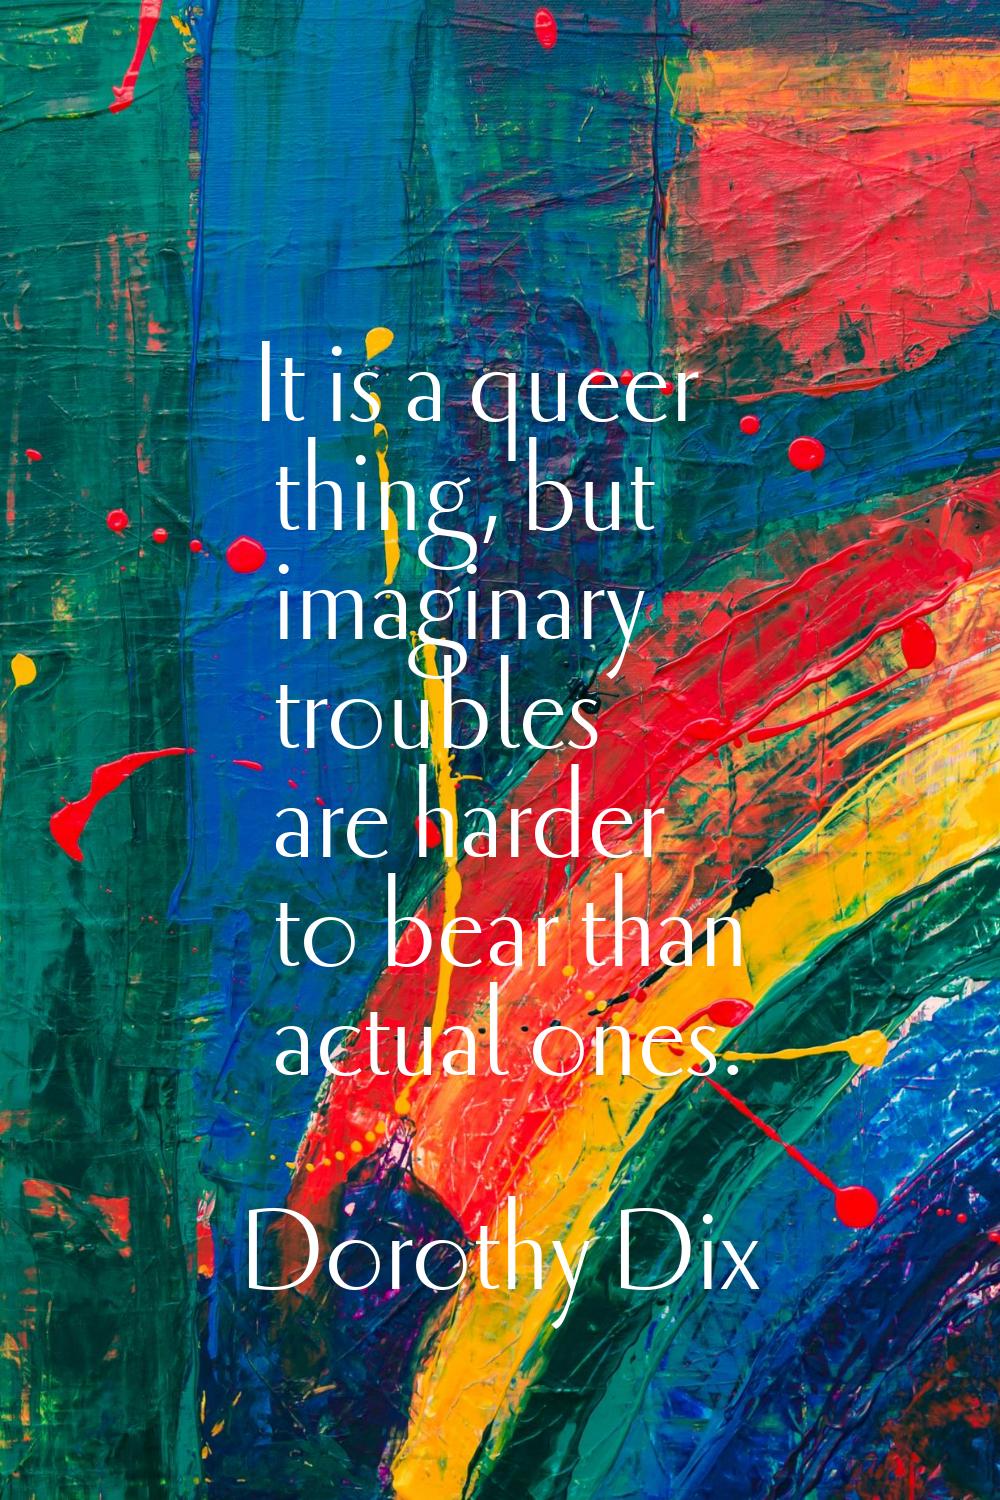 It is a queer thing, but imaginary troubles are harder to bear than actual ones.